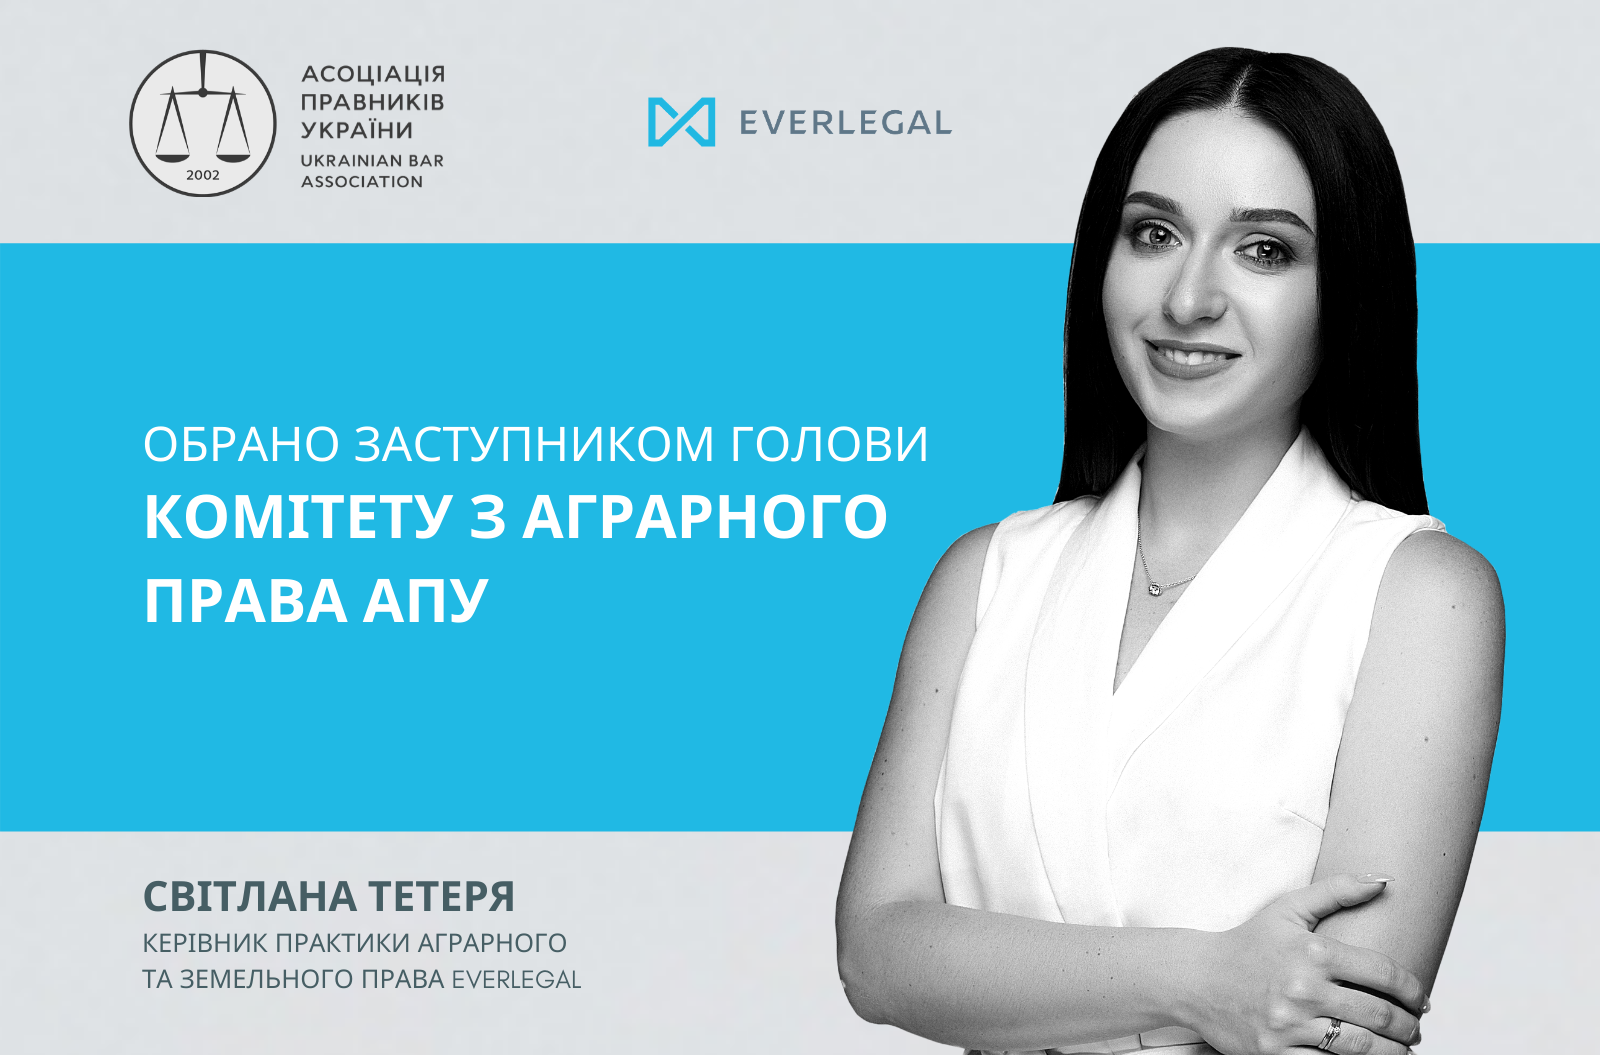 Svitlana Teteria is appointed as the vice-chairman of the Agriculture law committee